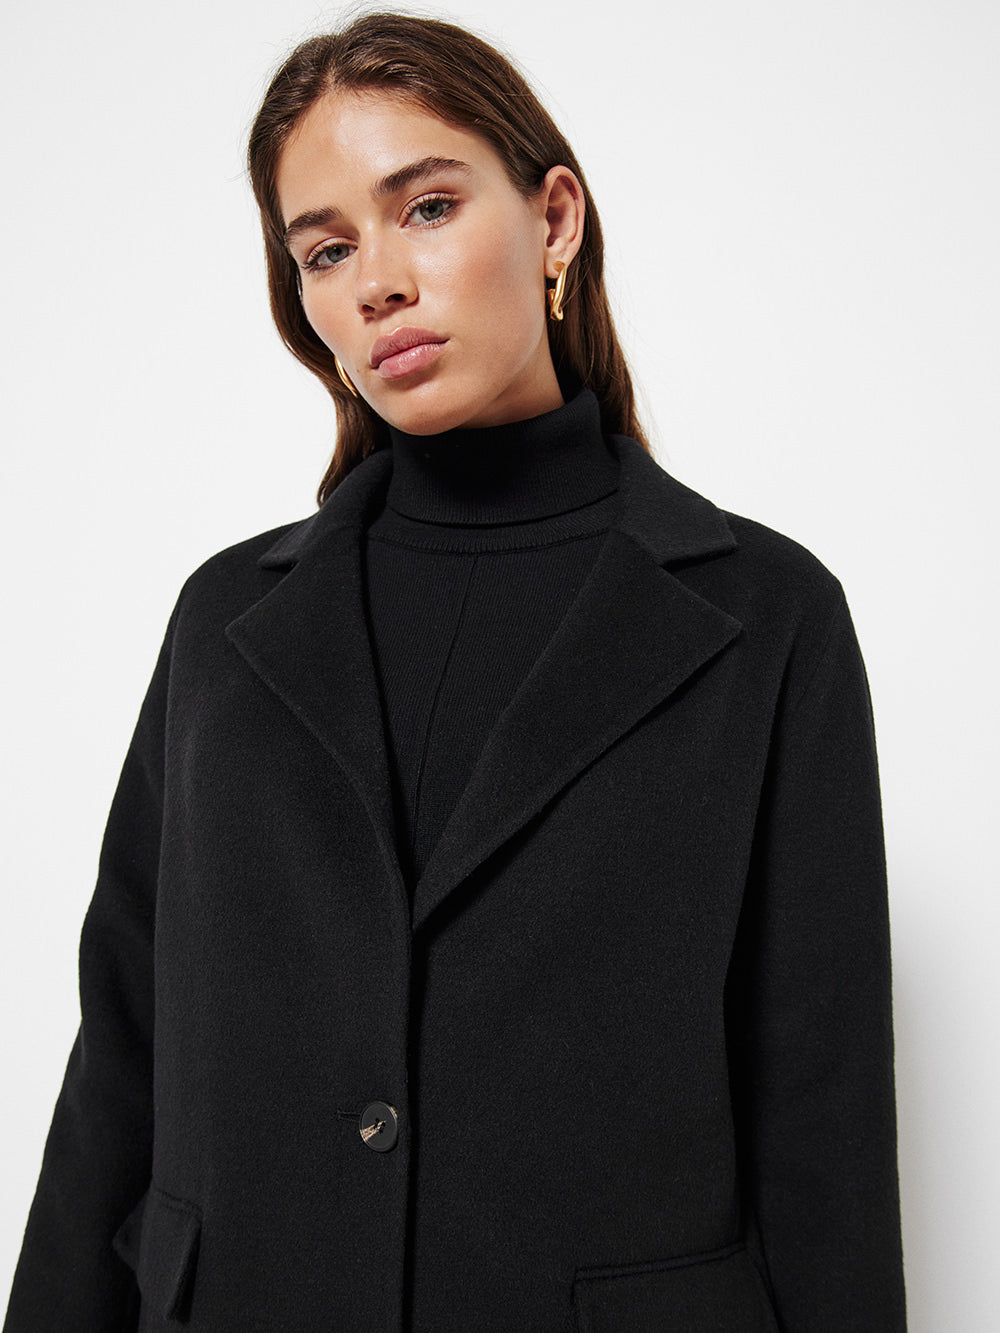 The Double Face Wool Crombie Coat